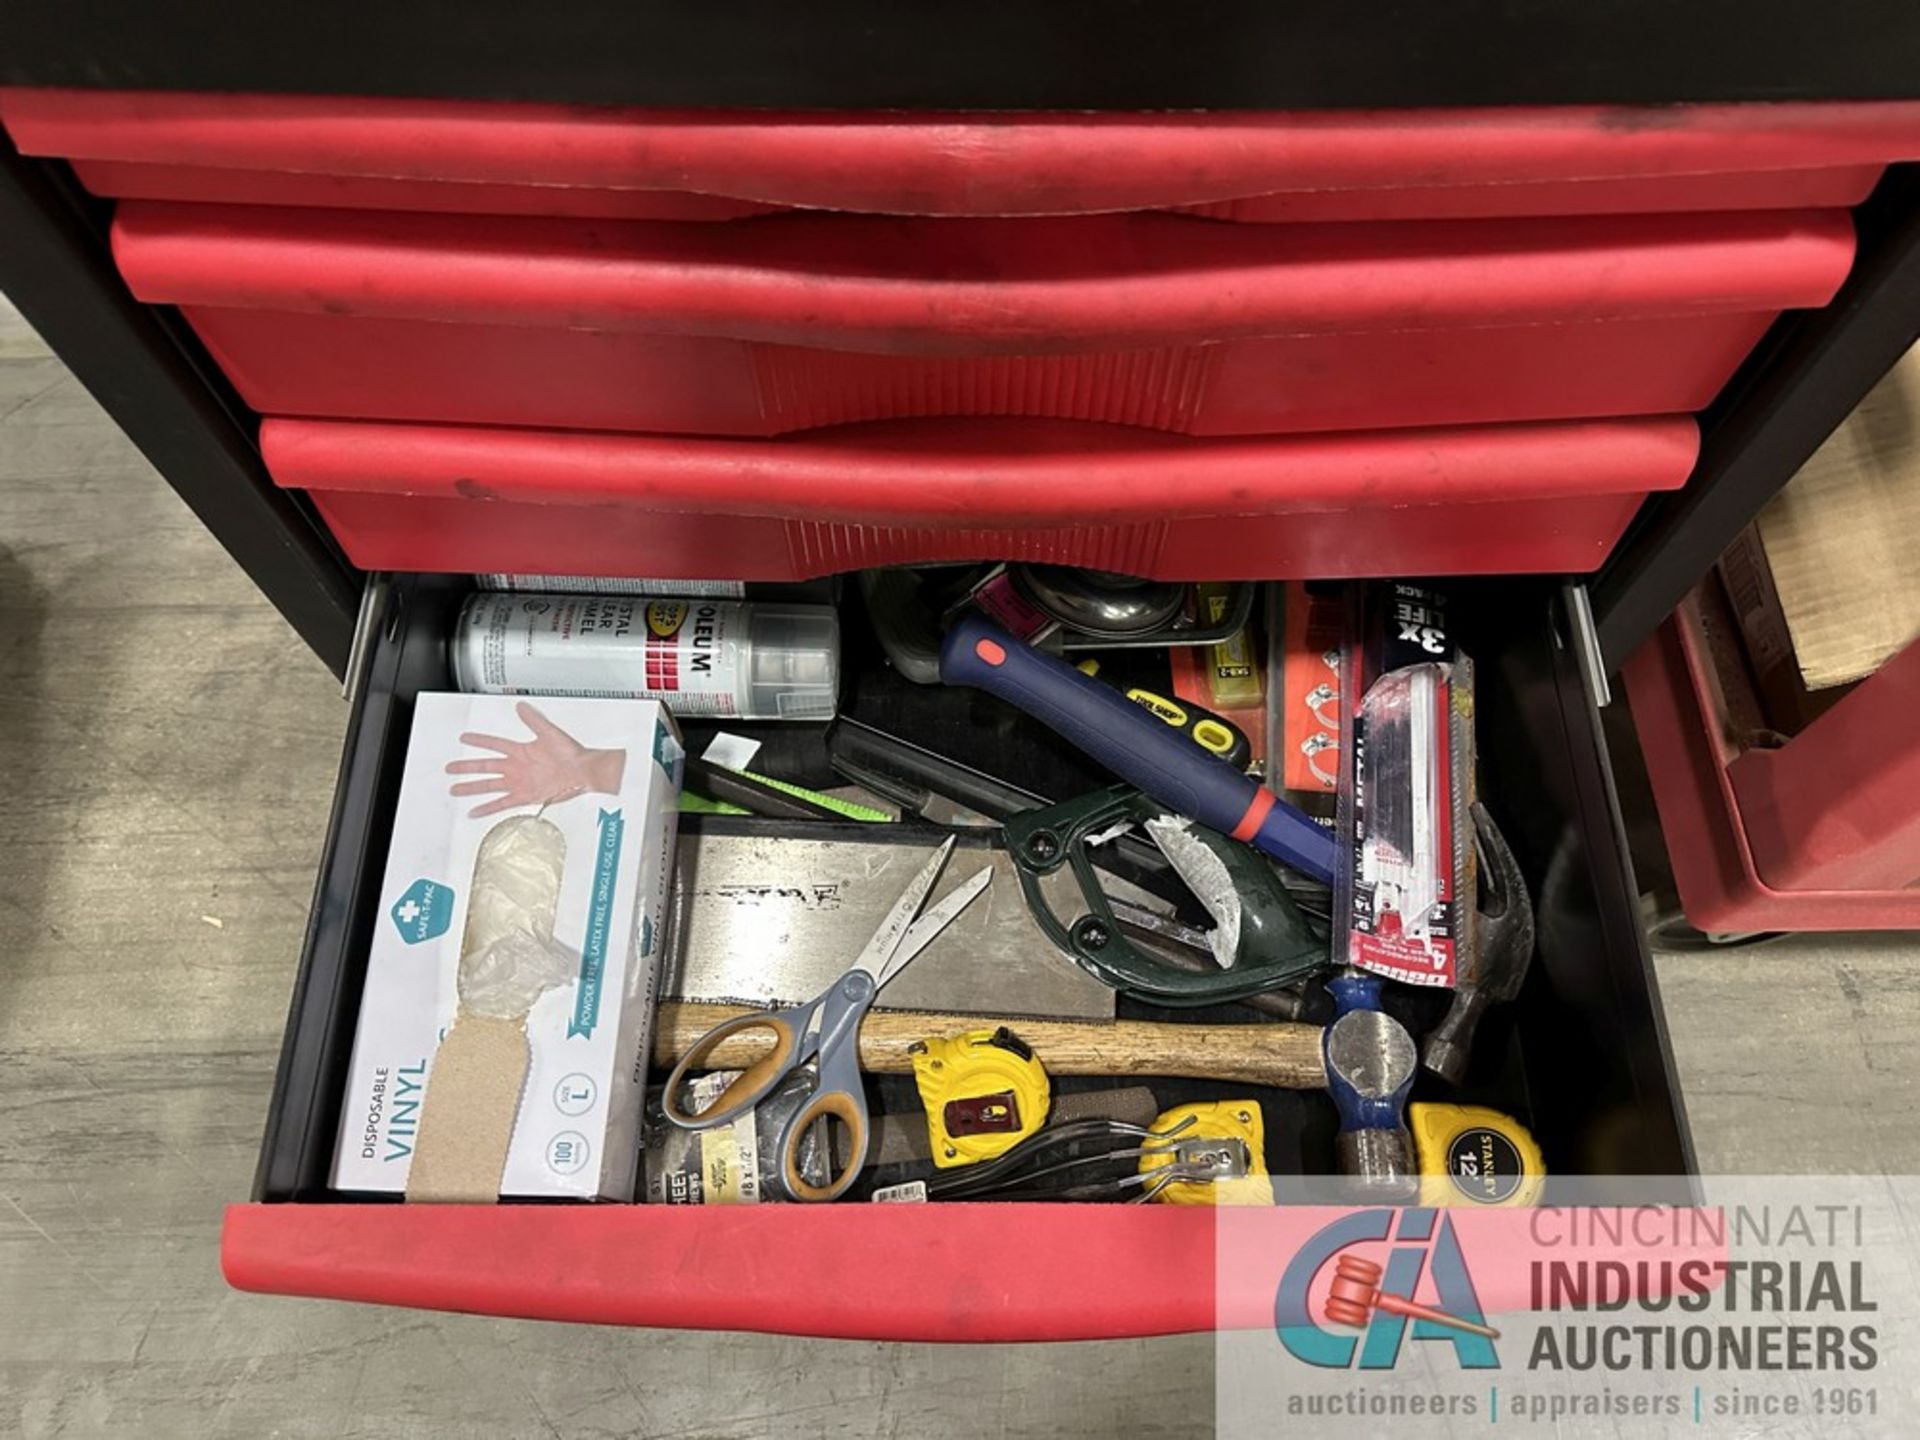 5-DRAWER PORTABLE TOOLBOX WITH ASSORTED HAND TOOLS - Image 7 of 7